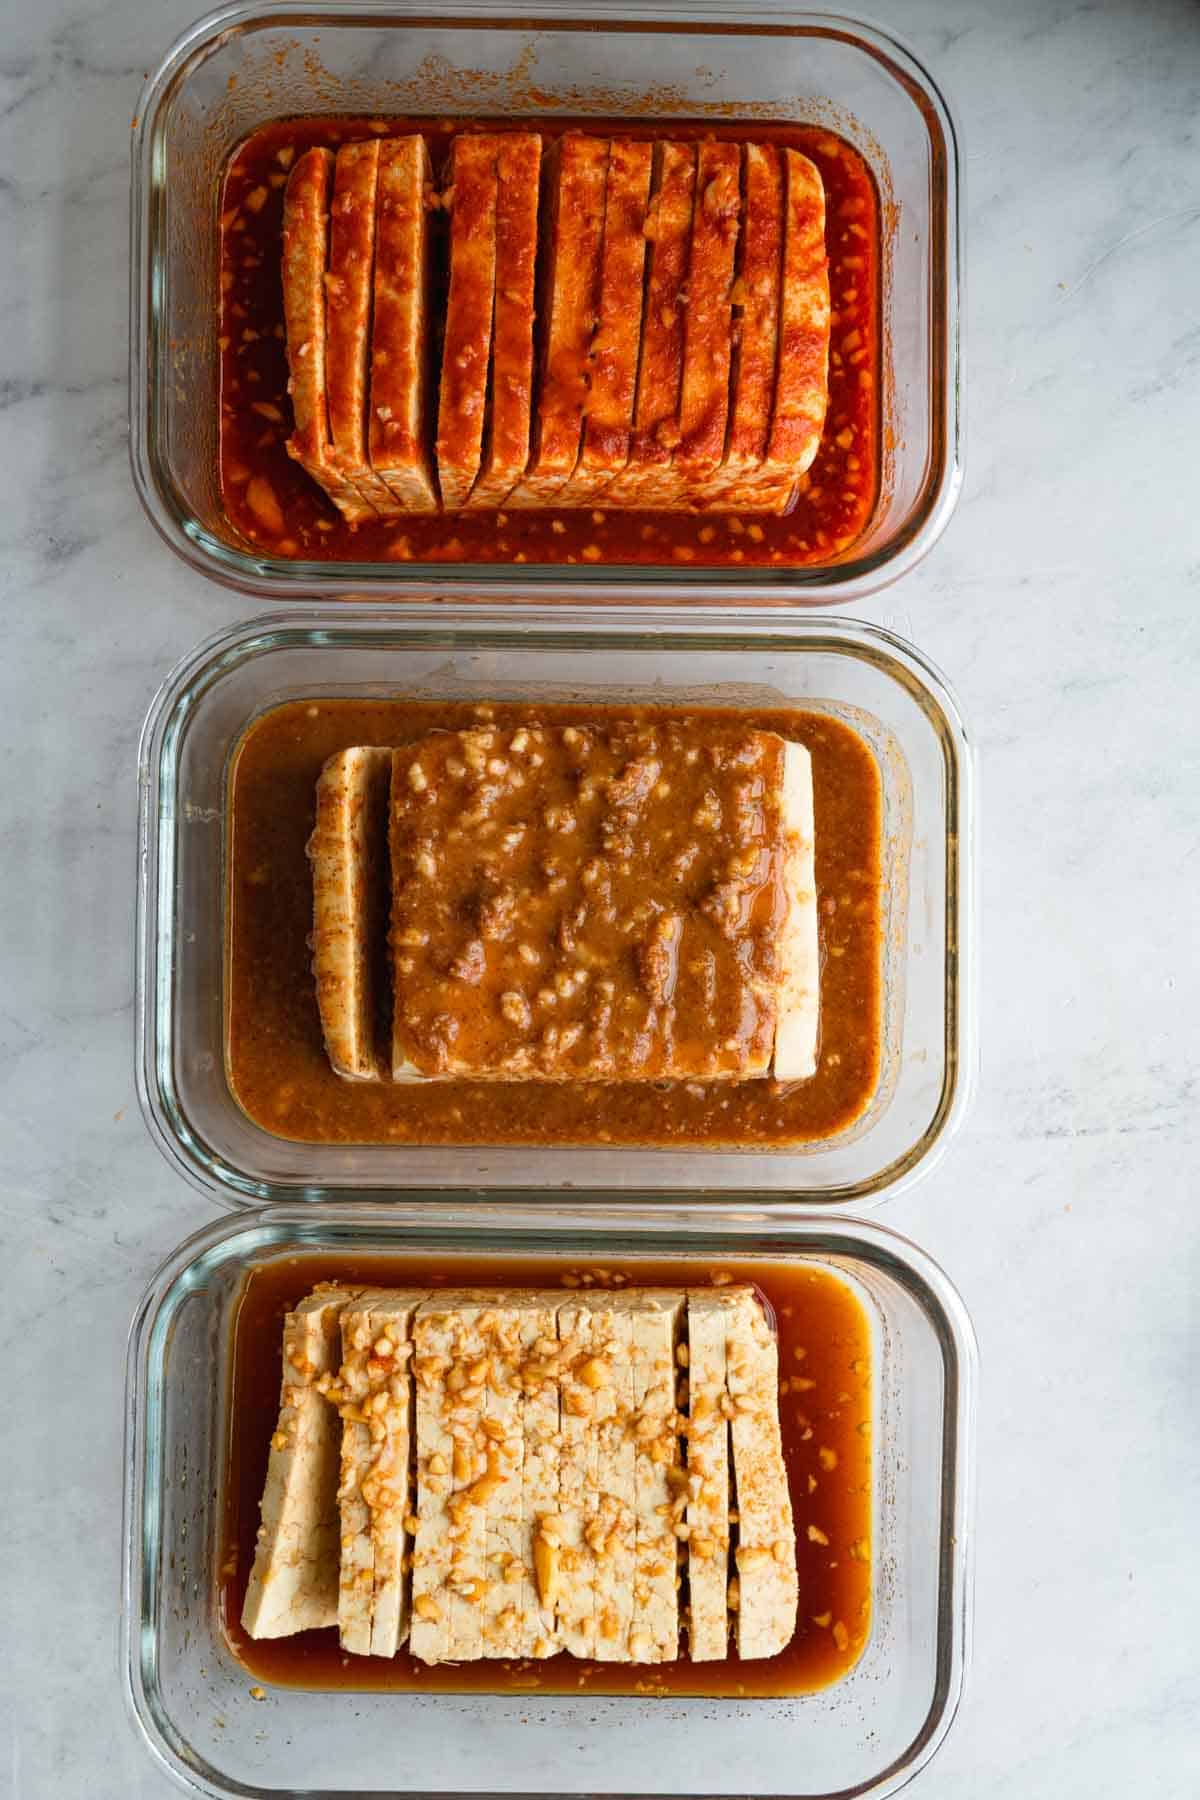 Three blocks of sliced tofu with three different marinades in three separate glass containers.